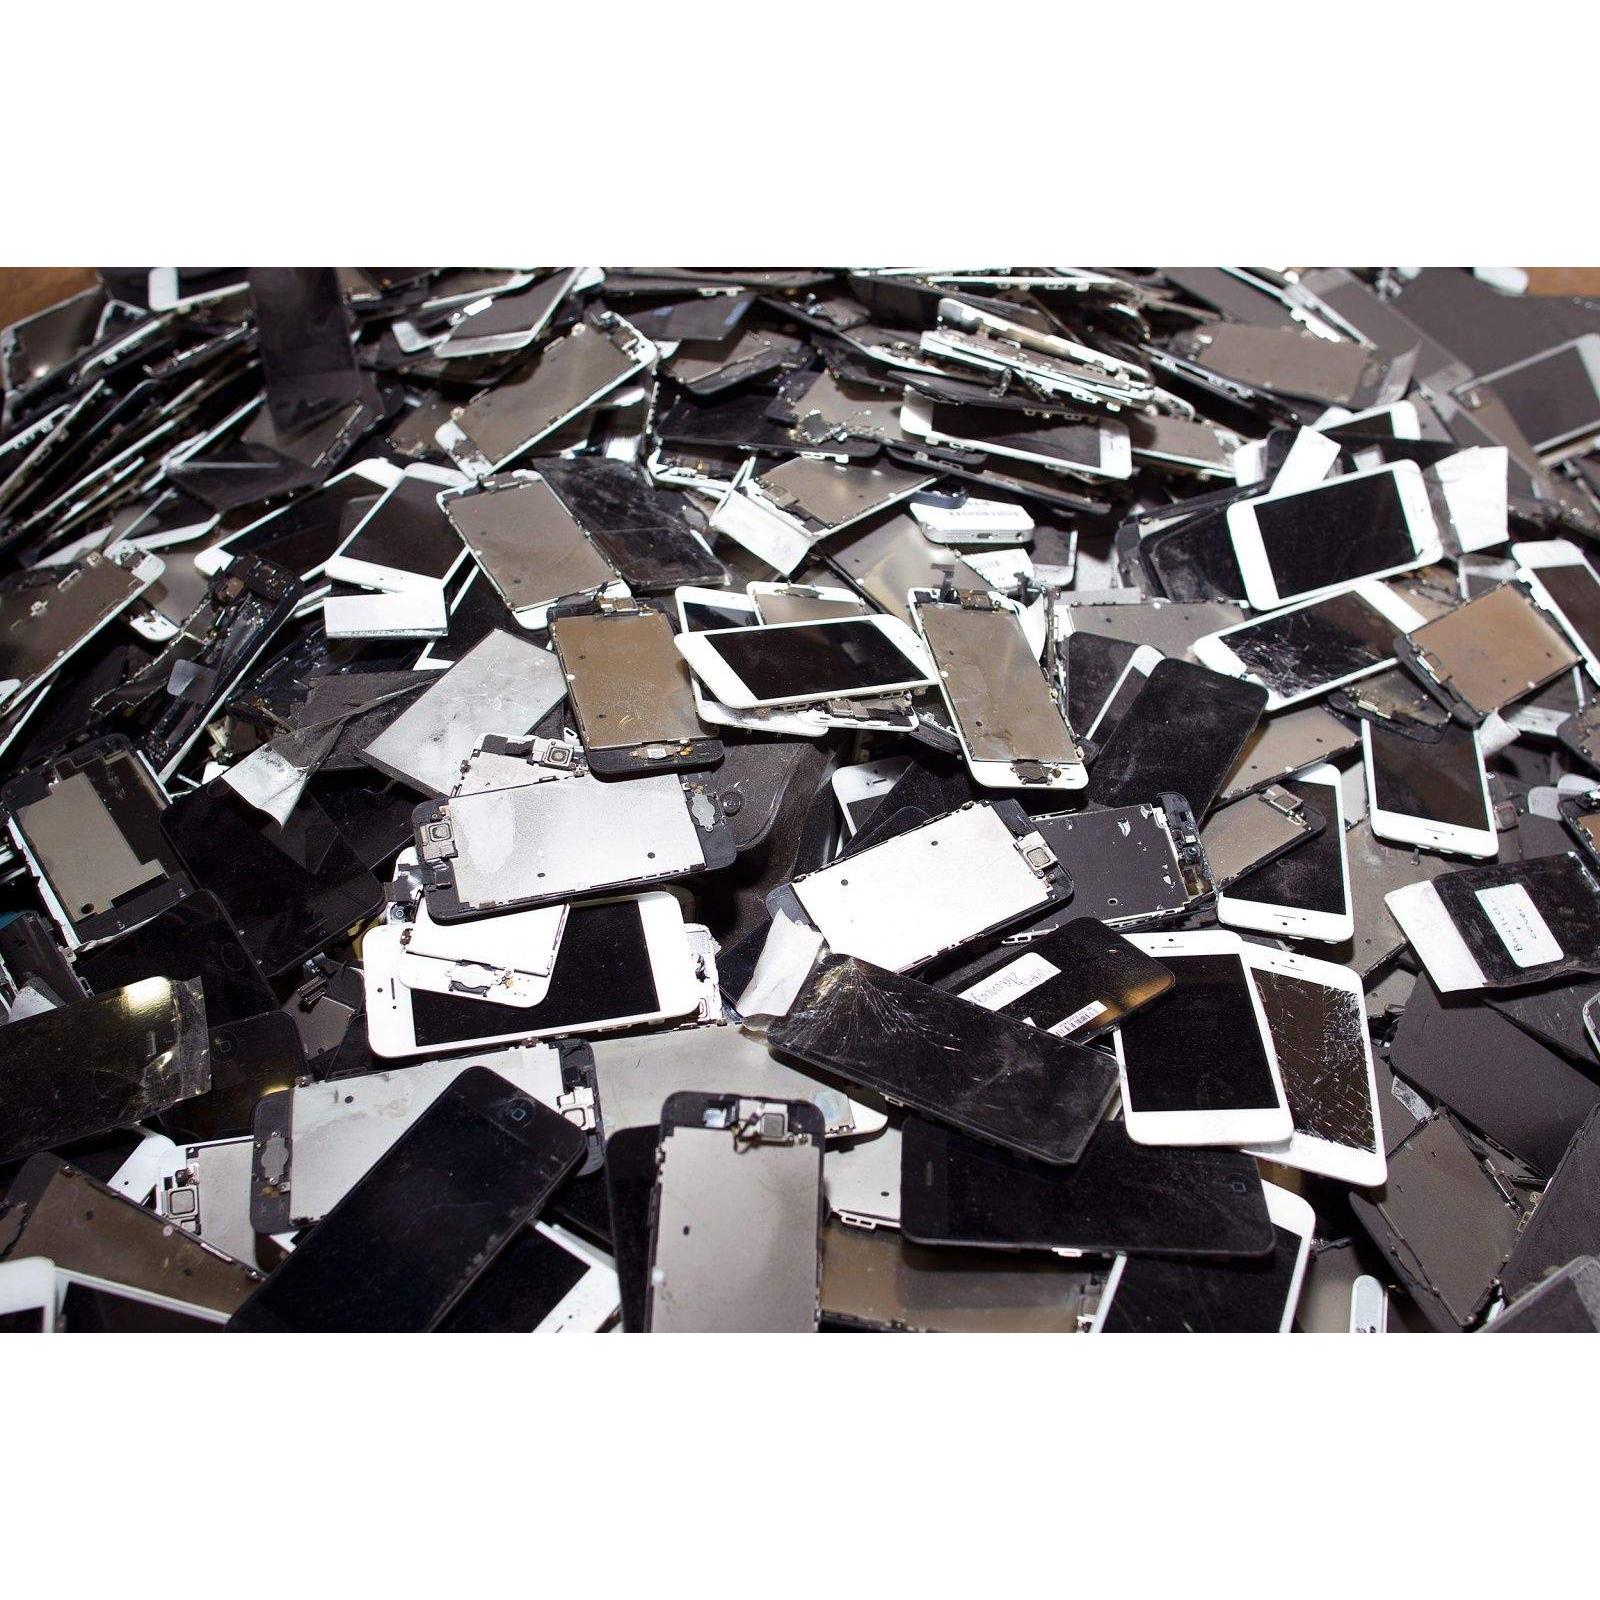 Apple iPhone6 LCD display Wholesale Suppliers